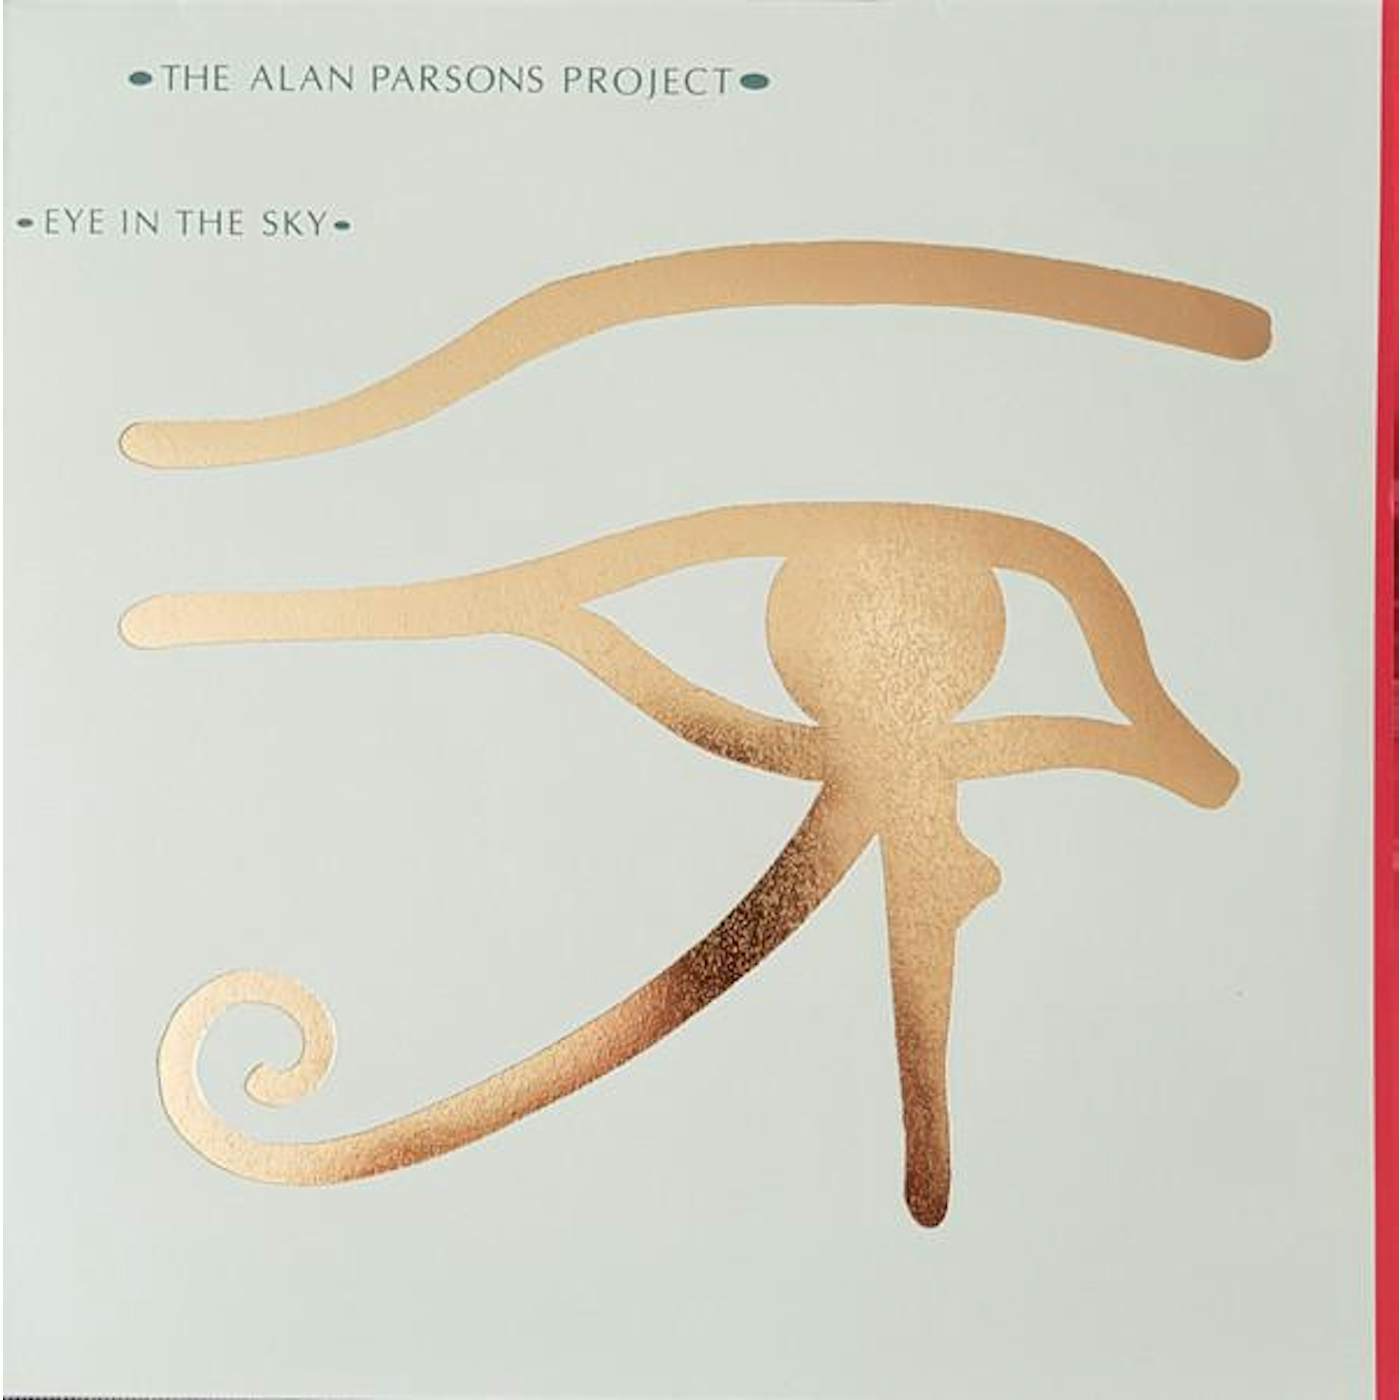 The Alan Parsons Project EYE IN THE SKY (DL CARD) Vinyl Record